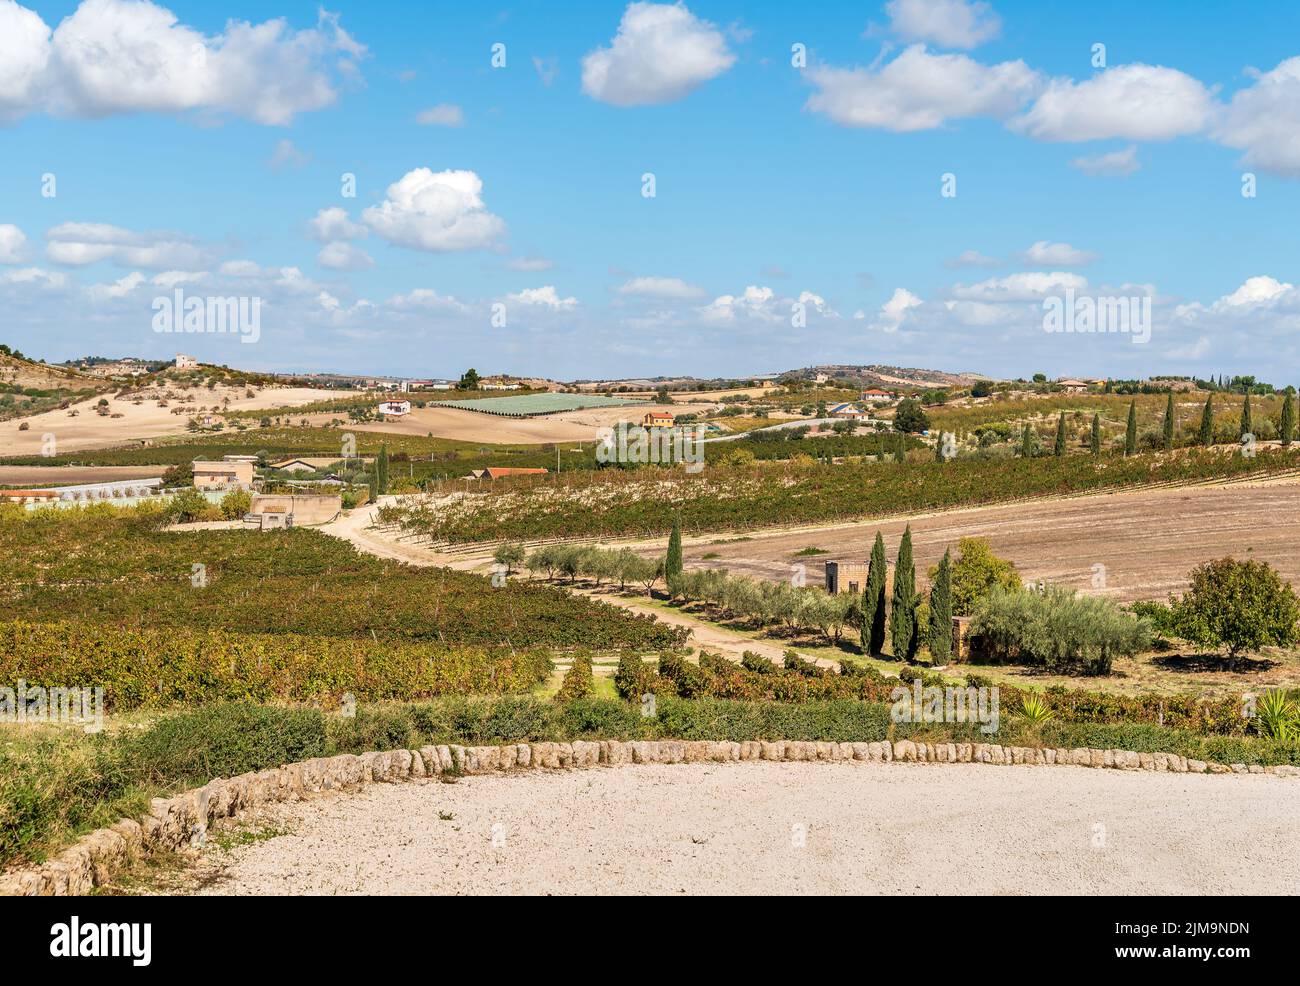 Countryside landscape with the hills of the Campobello di Licata in province of Agrigento, Sicily, Italy Stock Photo